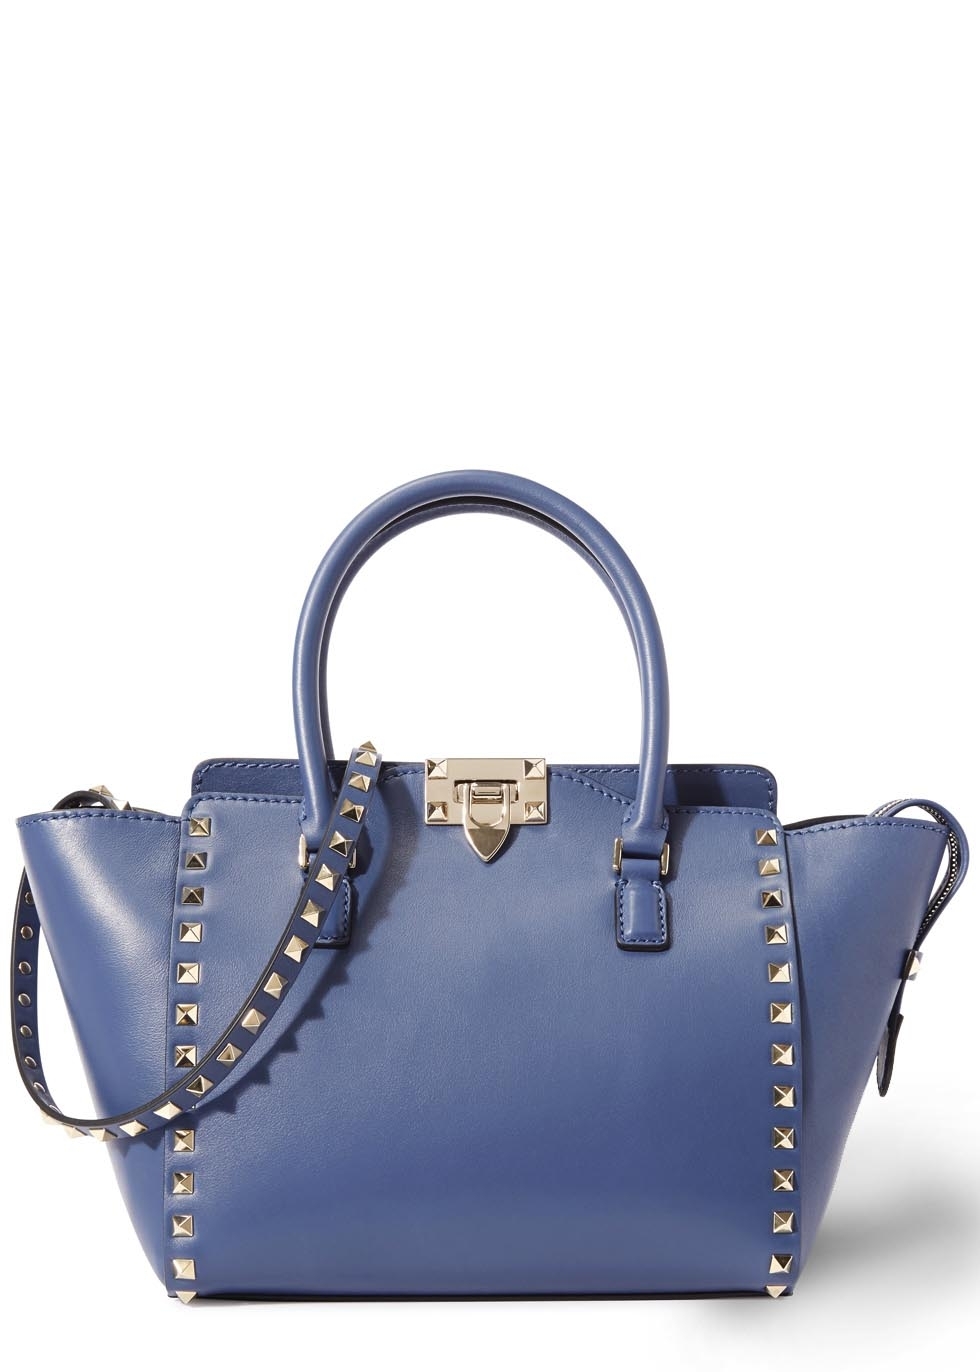 Rockstud small blue leather tote